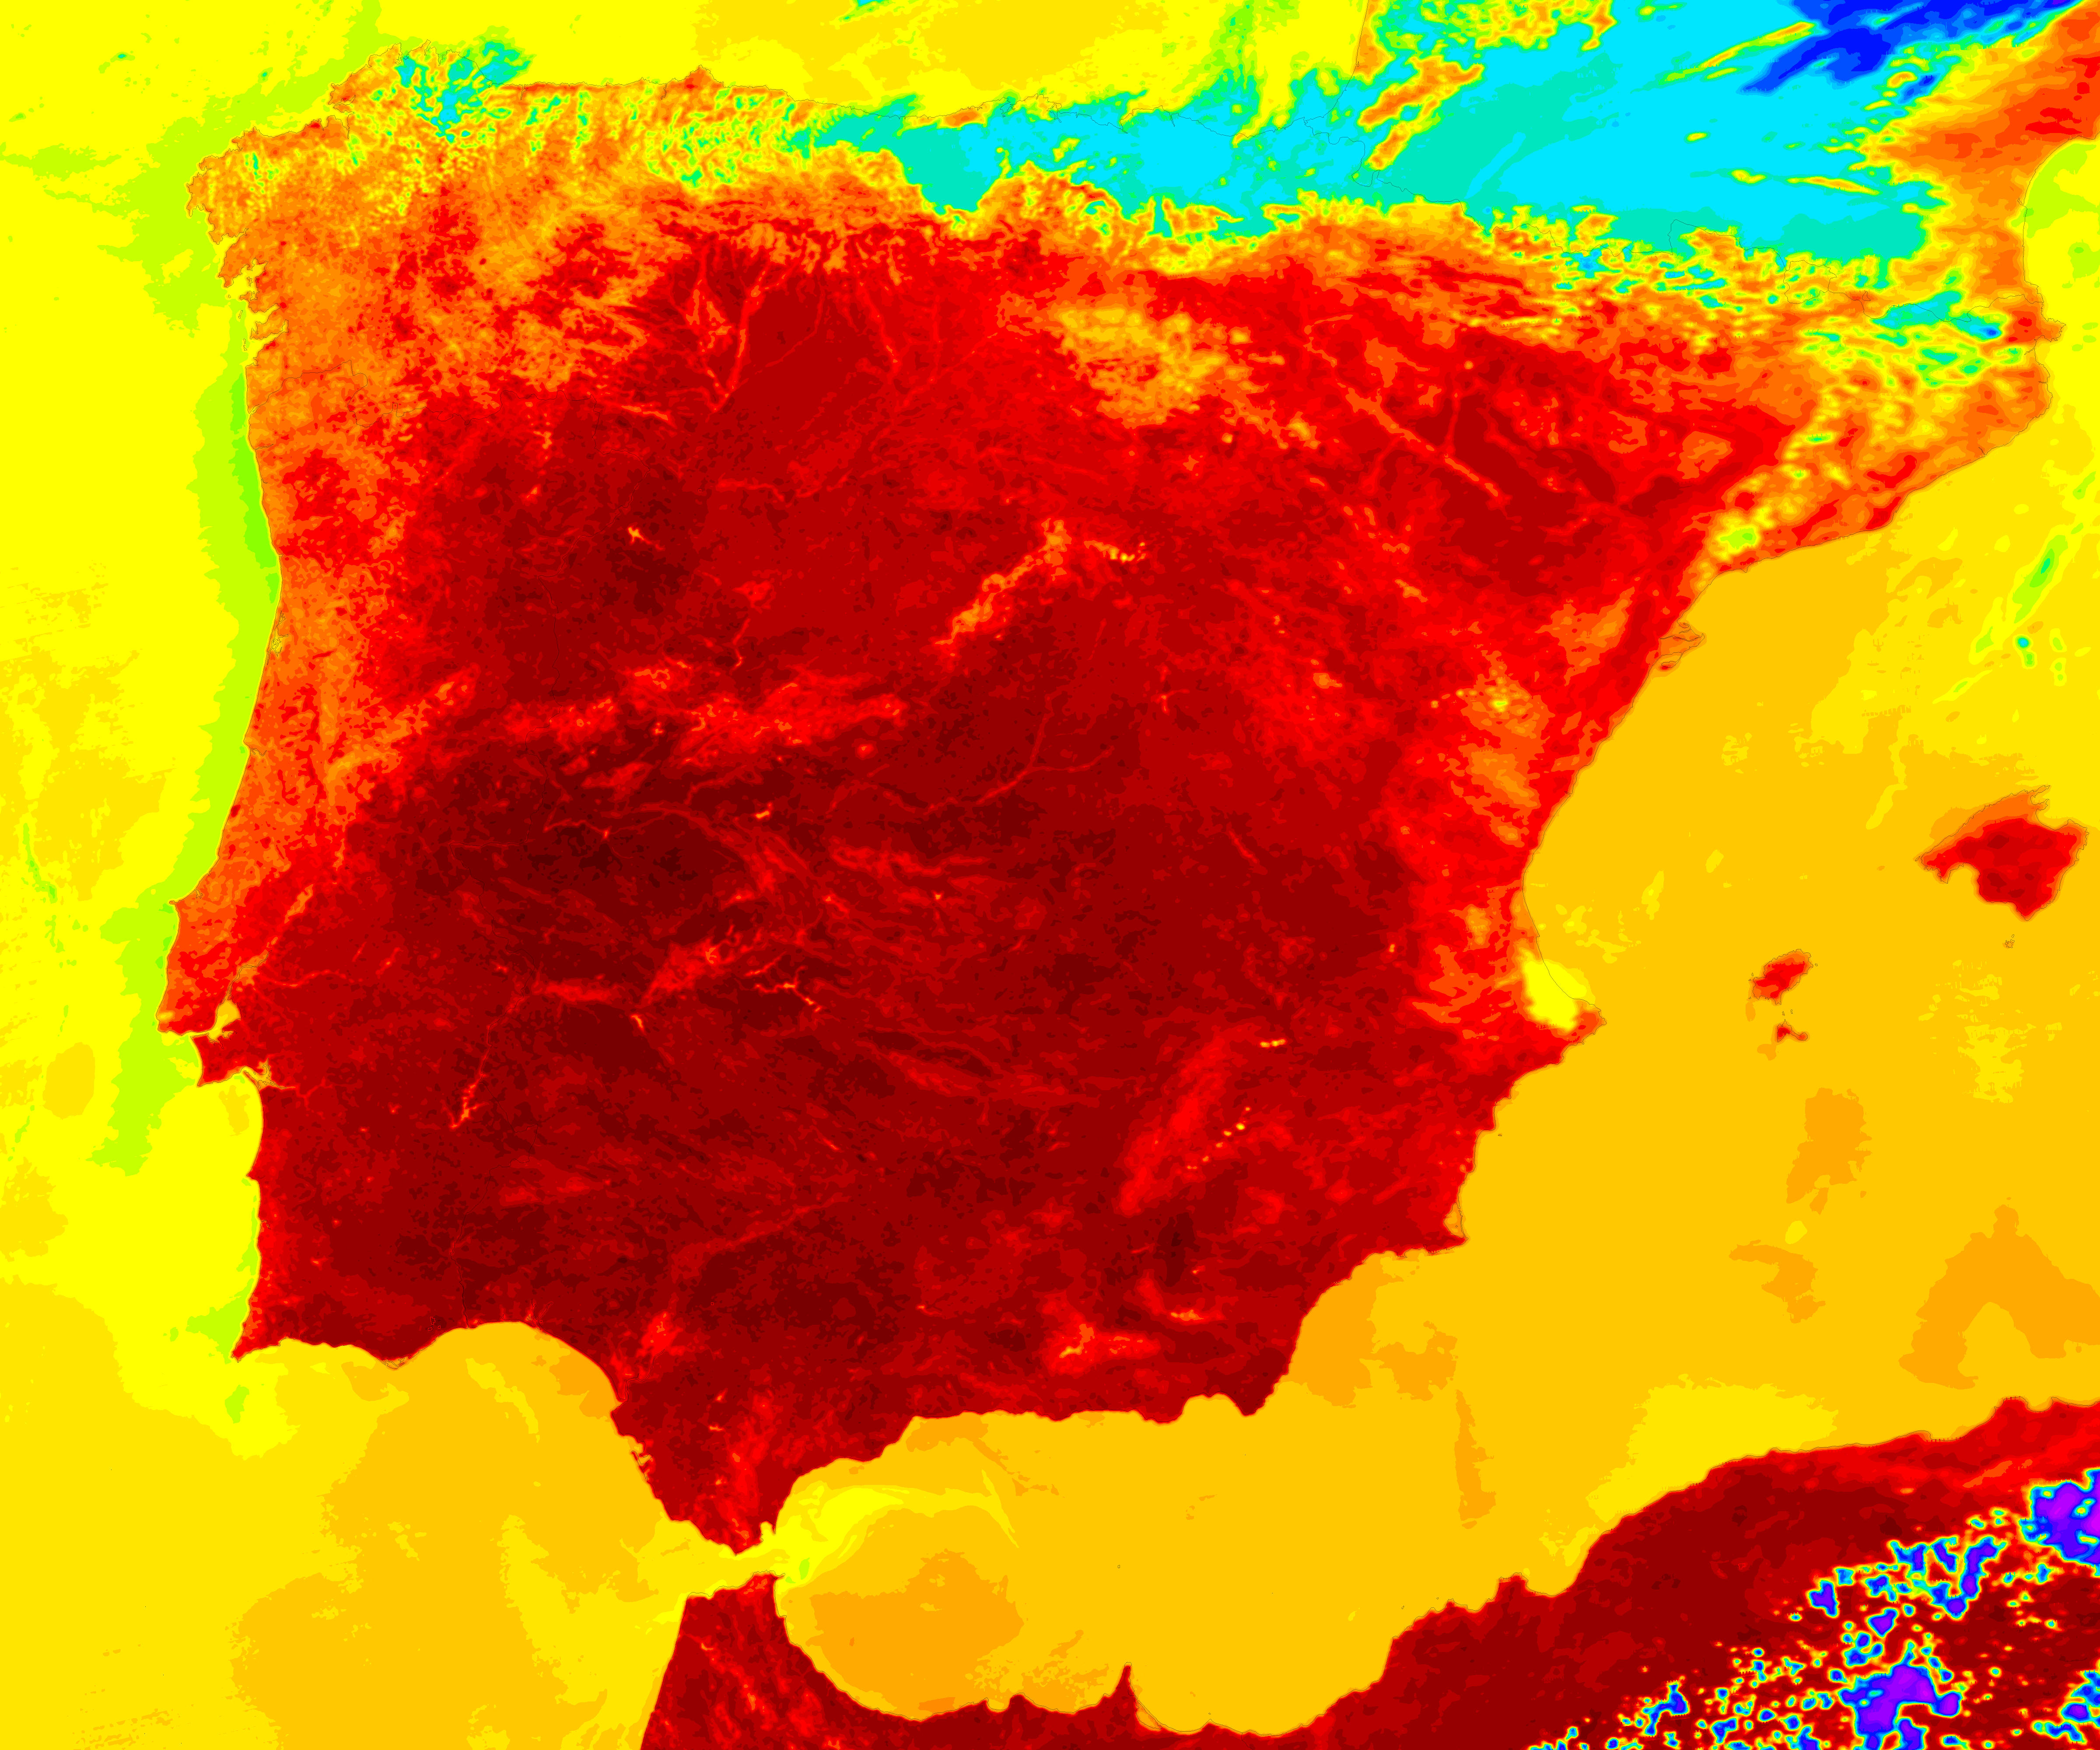 Summer Heatwave in Spain Image of the Day